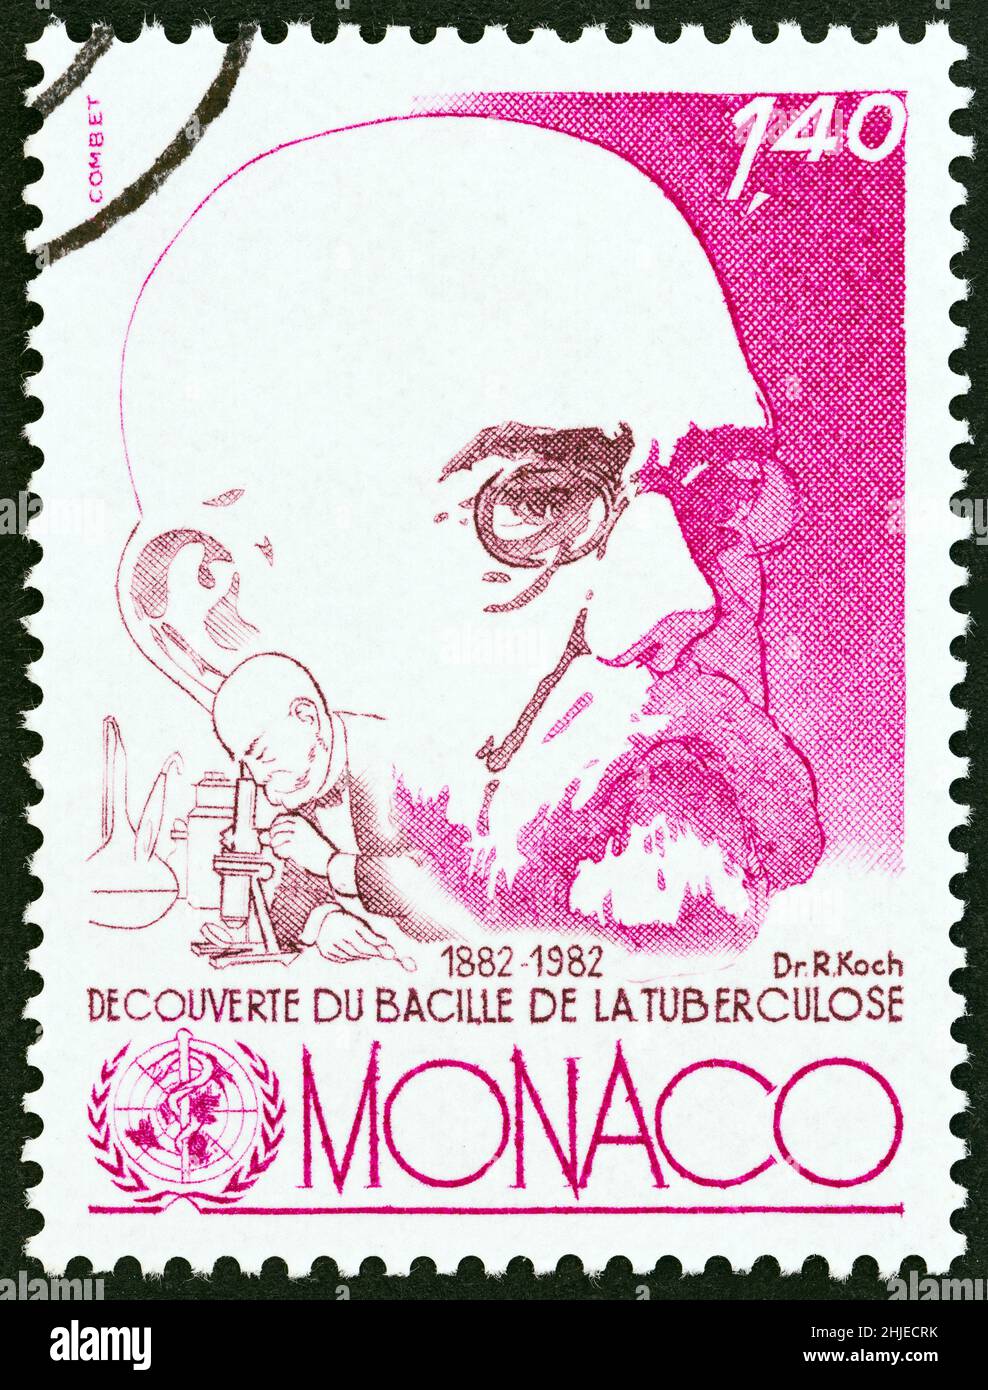 MONACO - CIRCA 1982: A stamp printed in Monaco issued for the 100th anniversary of discovery of Tubercle Bacillus shows Dr. Robert Koch, circa 1982. Stock Photo